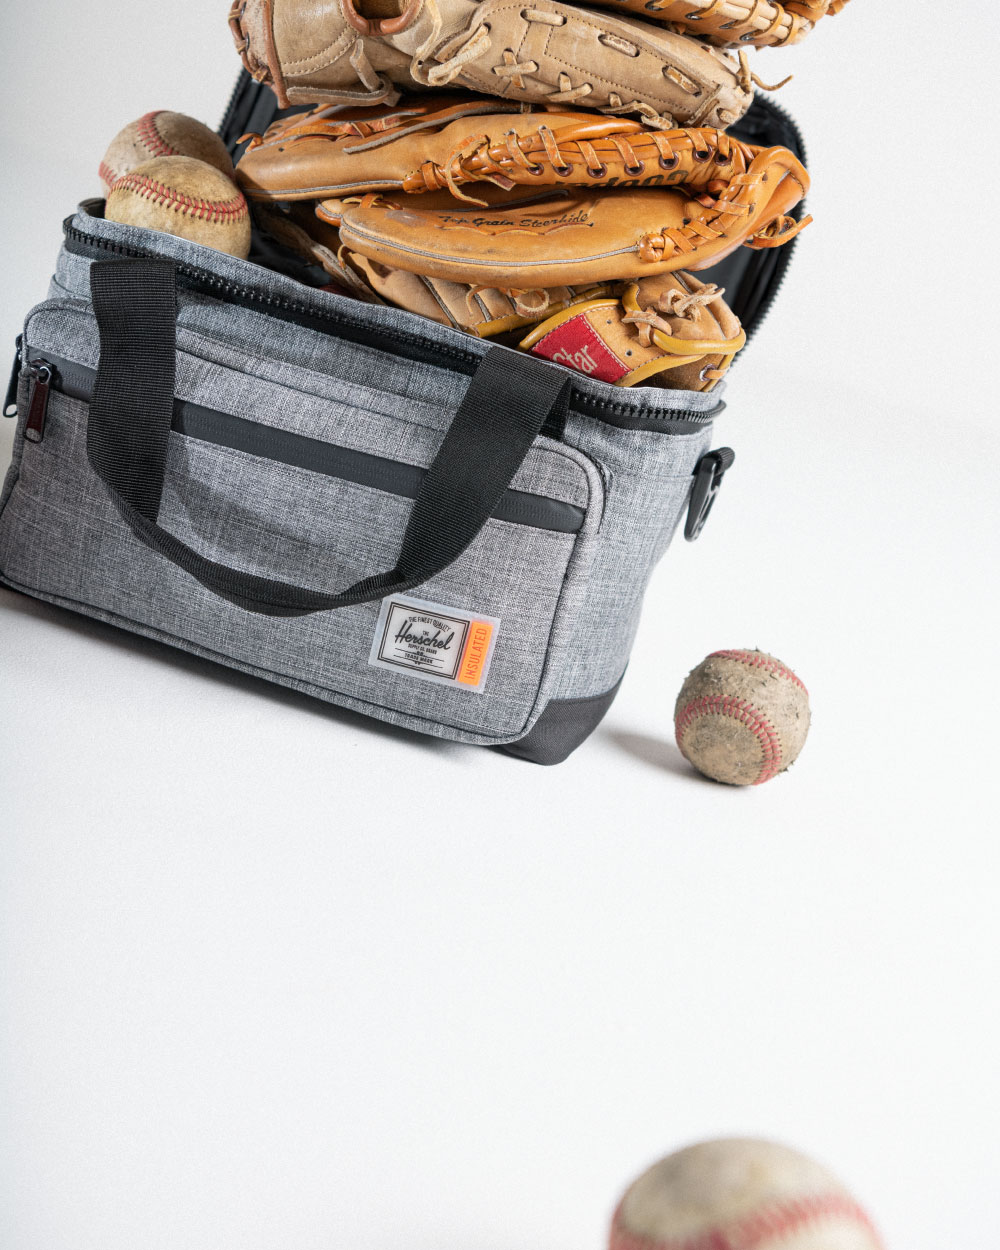 Three baseball gloves and some baseballs sticking out of the main compartment of the Herschel Supply Pop Quiz Cooler 12 Pack Insulated in Raven Crosshatch